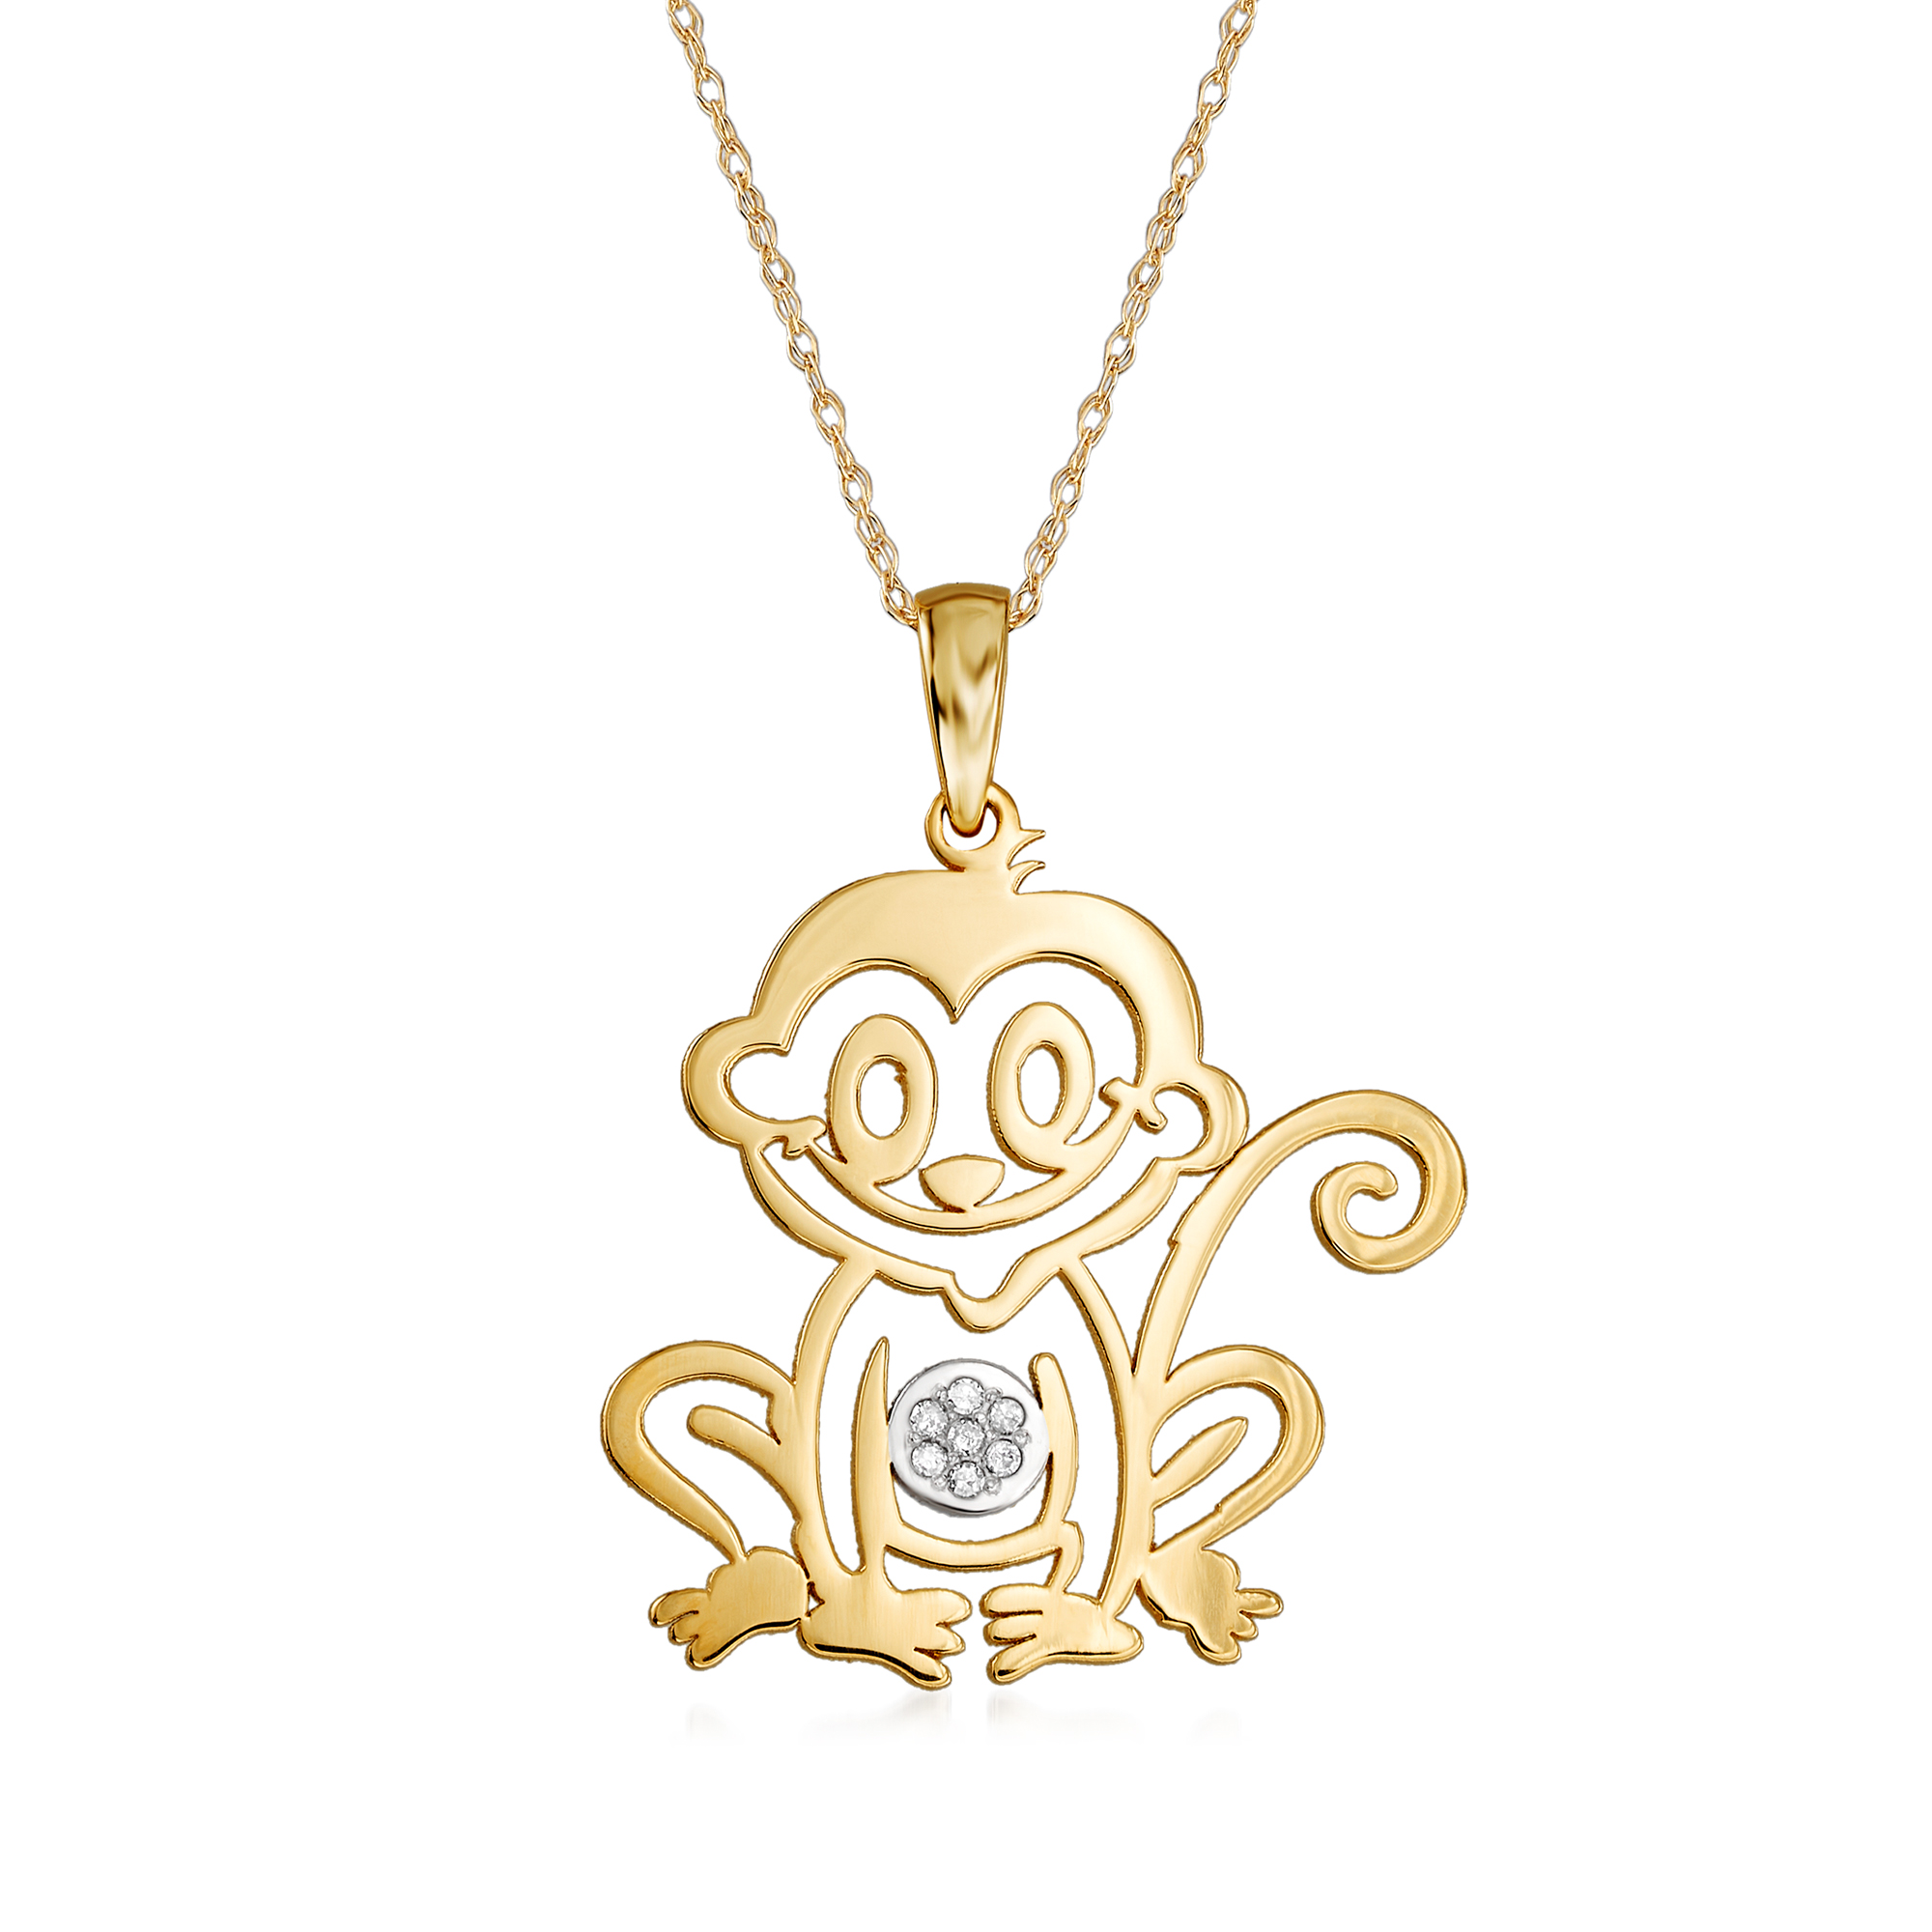 Wishrocks Round Cut Diamond Accent Hanging Monkey Pendant Necklace in 14K Gold Over Sterling Silver